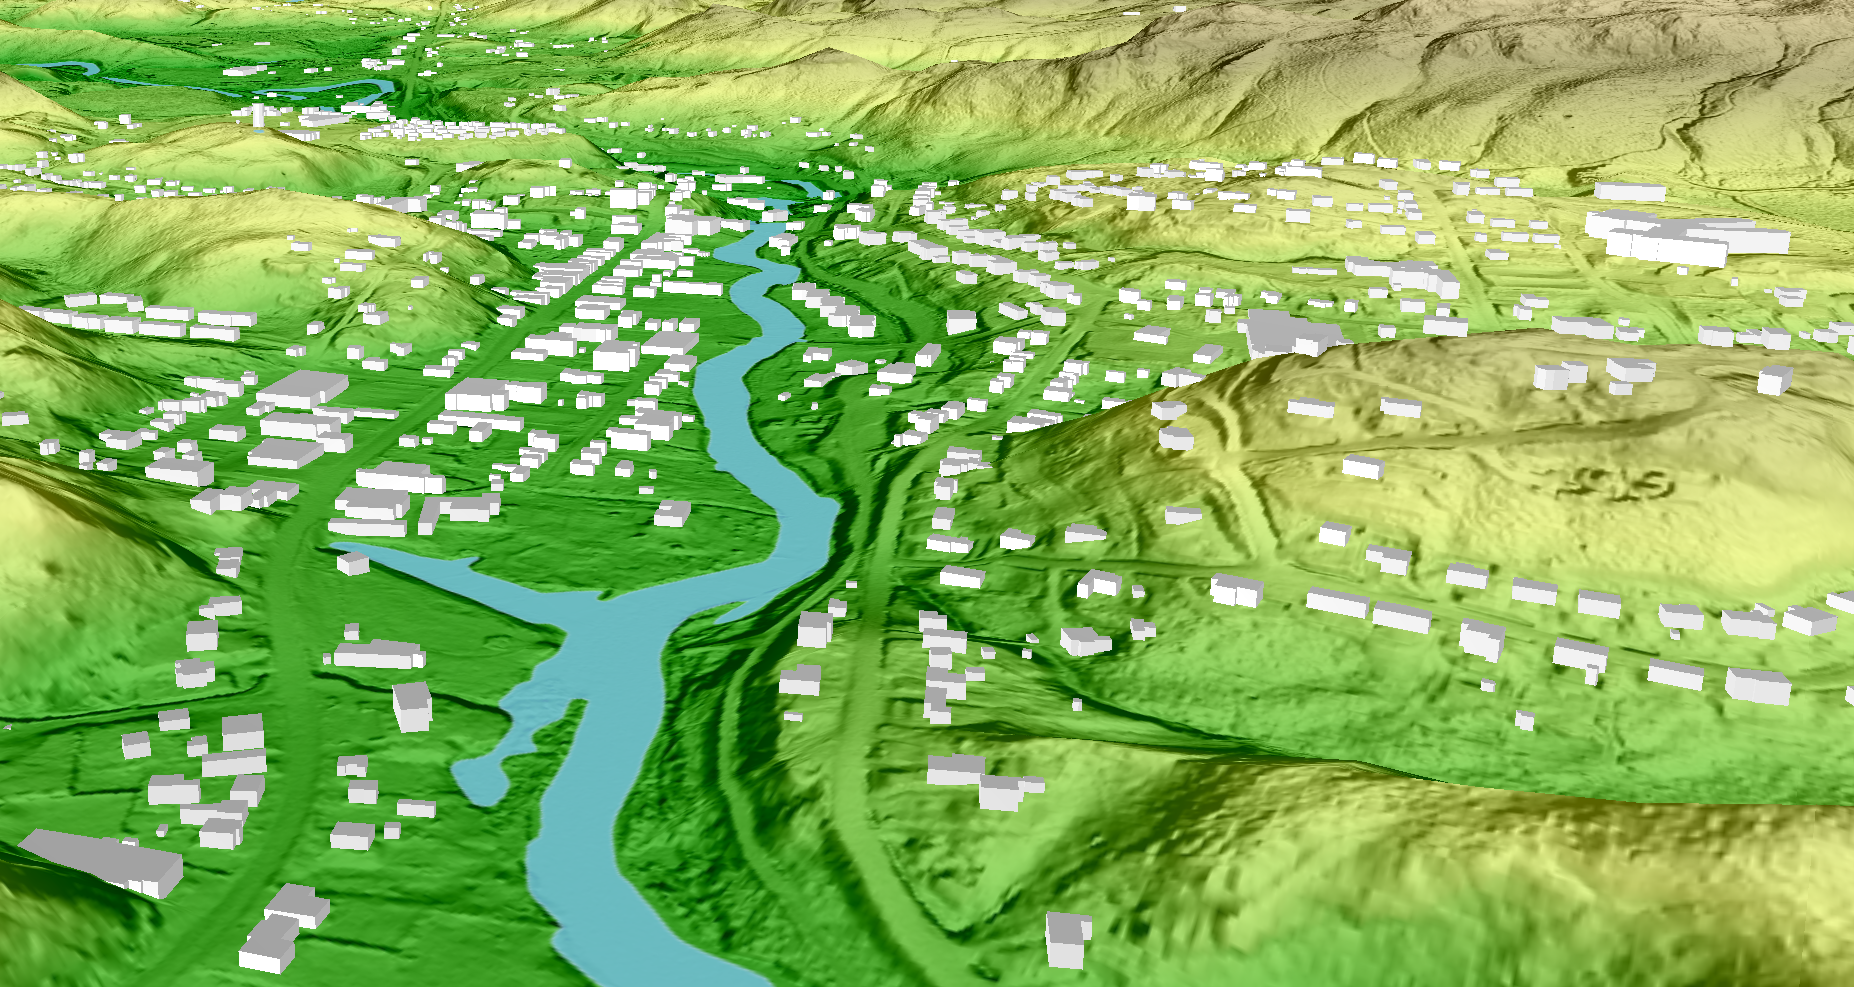 3D representation of a territory with buildings, roads, a river among changing relief.